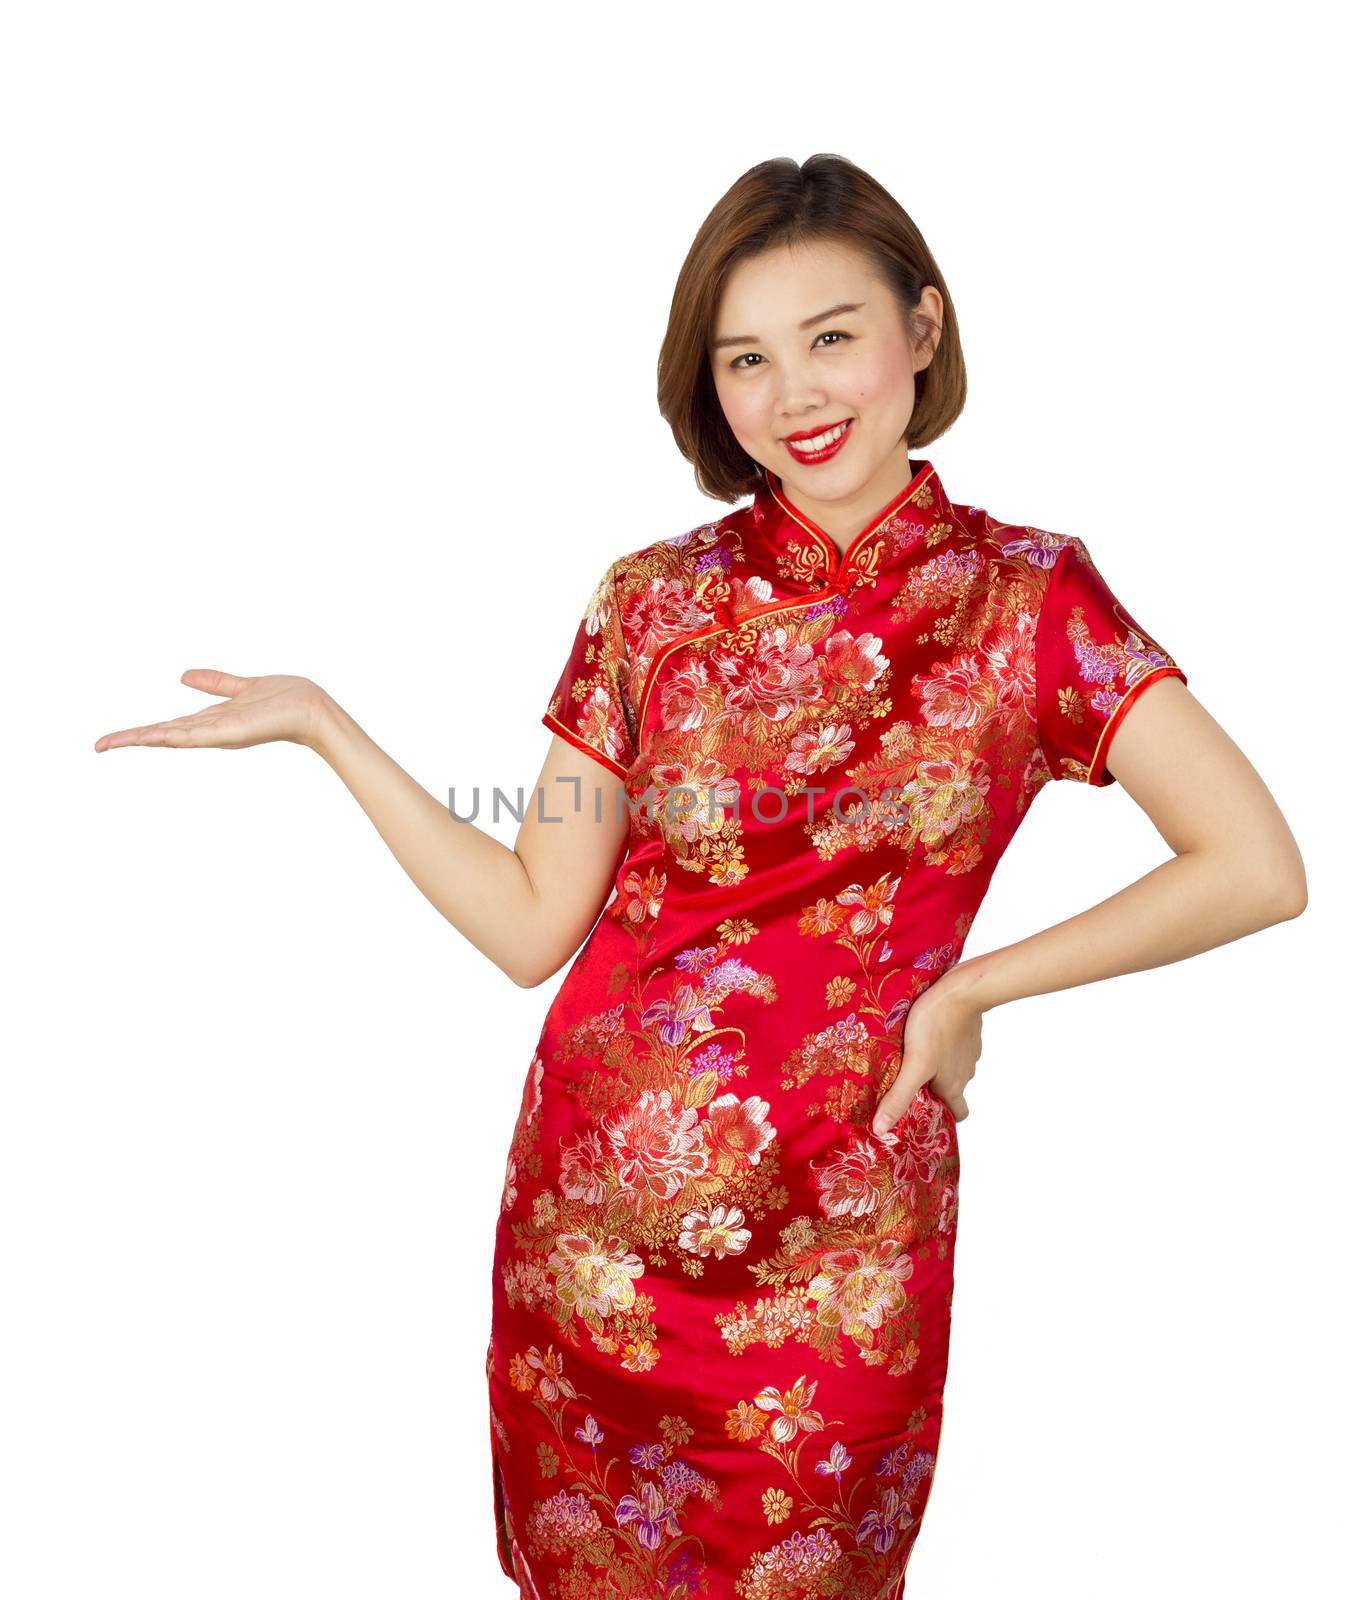 Asian girl poses or present on isolated white background.